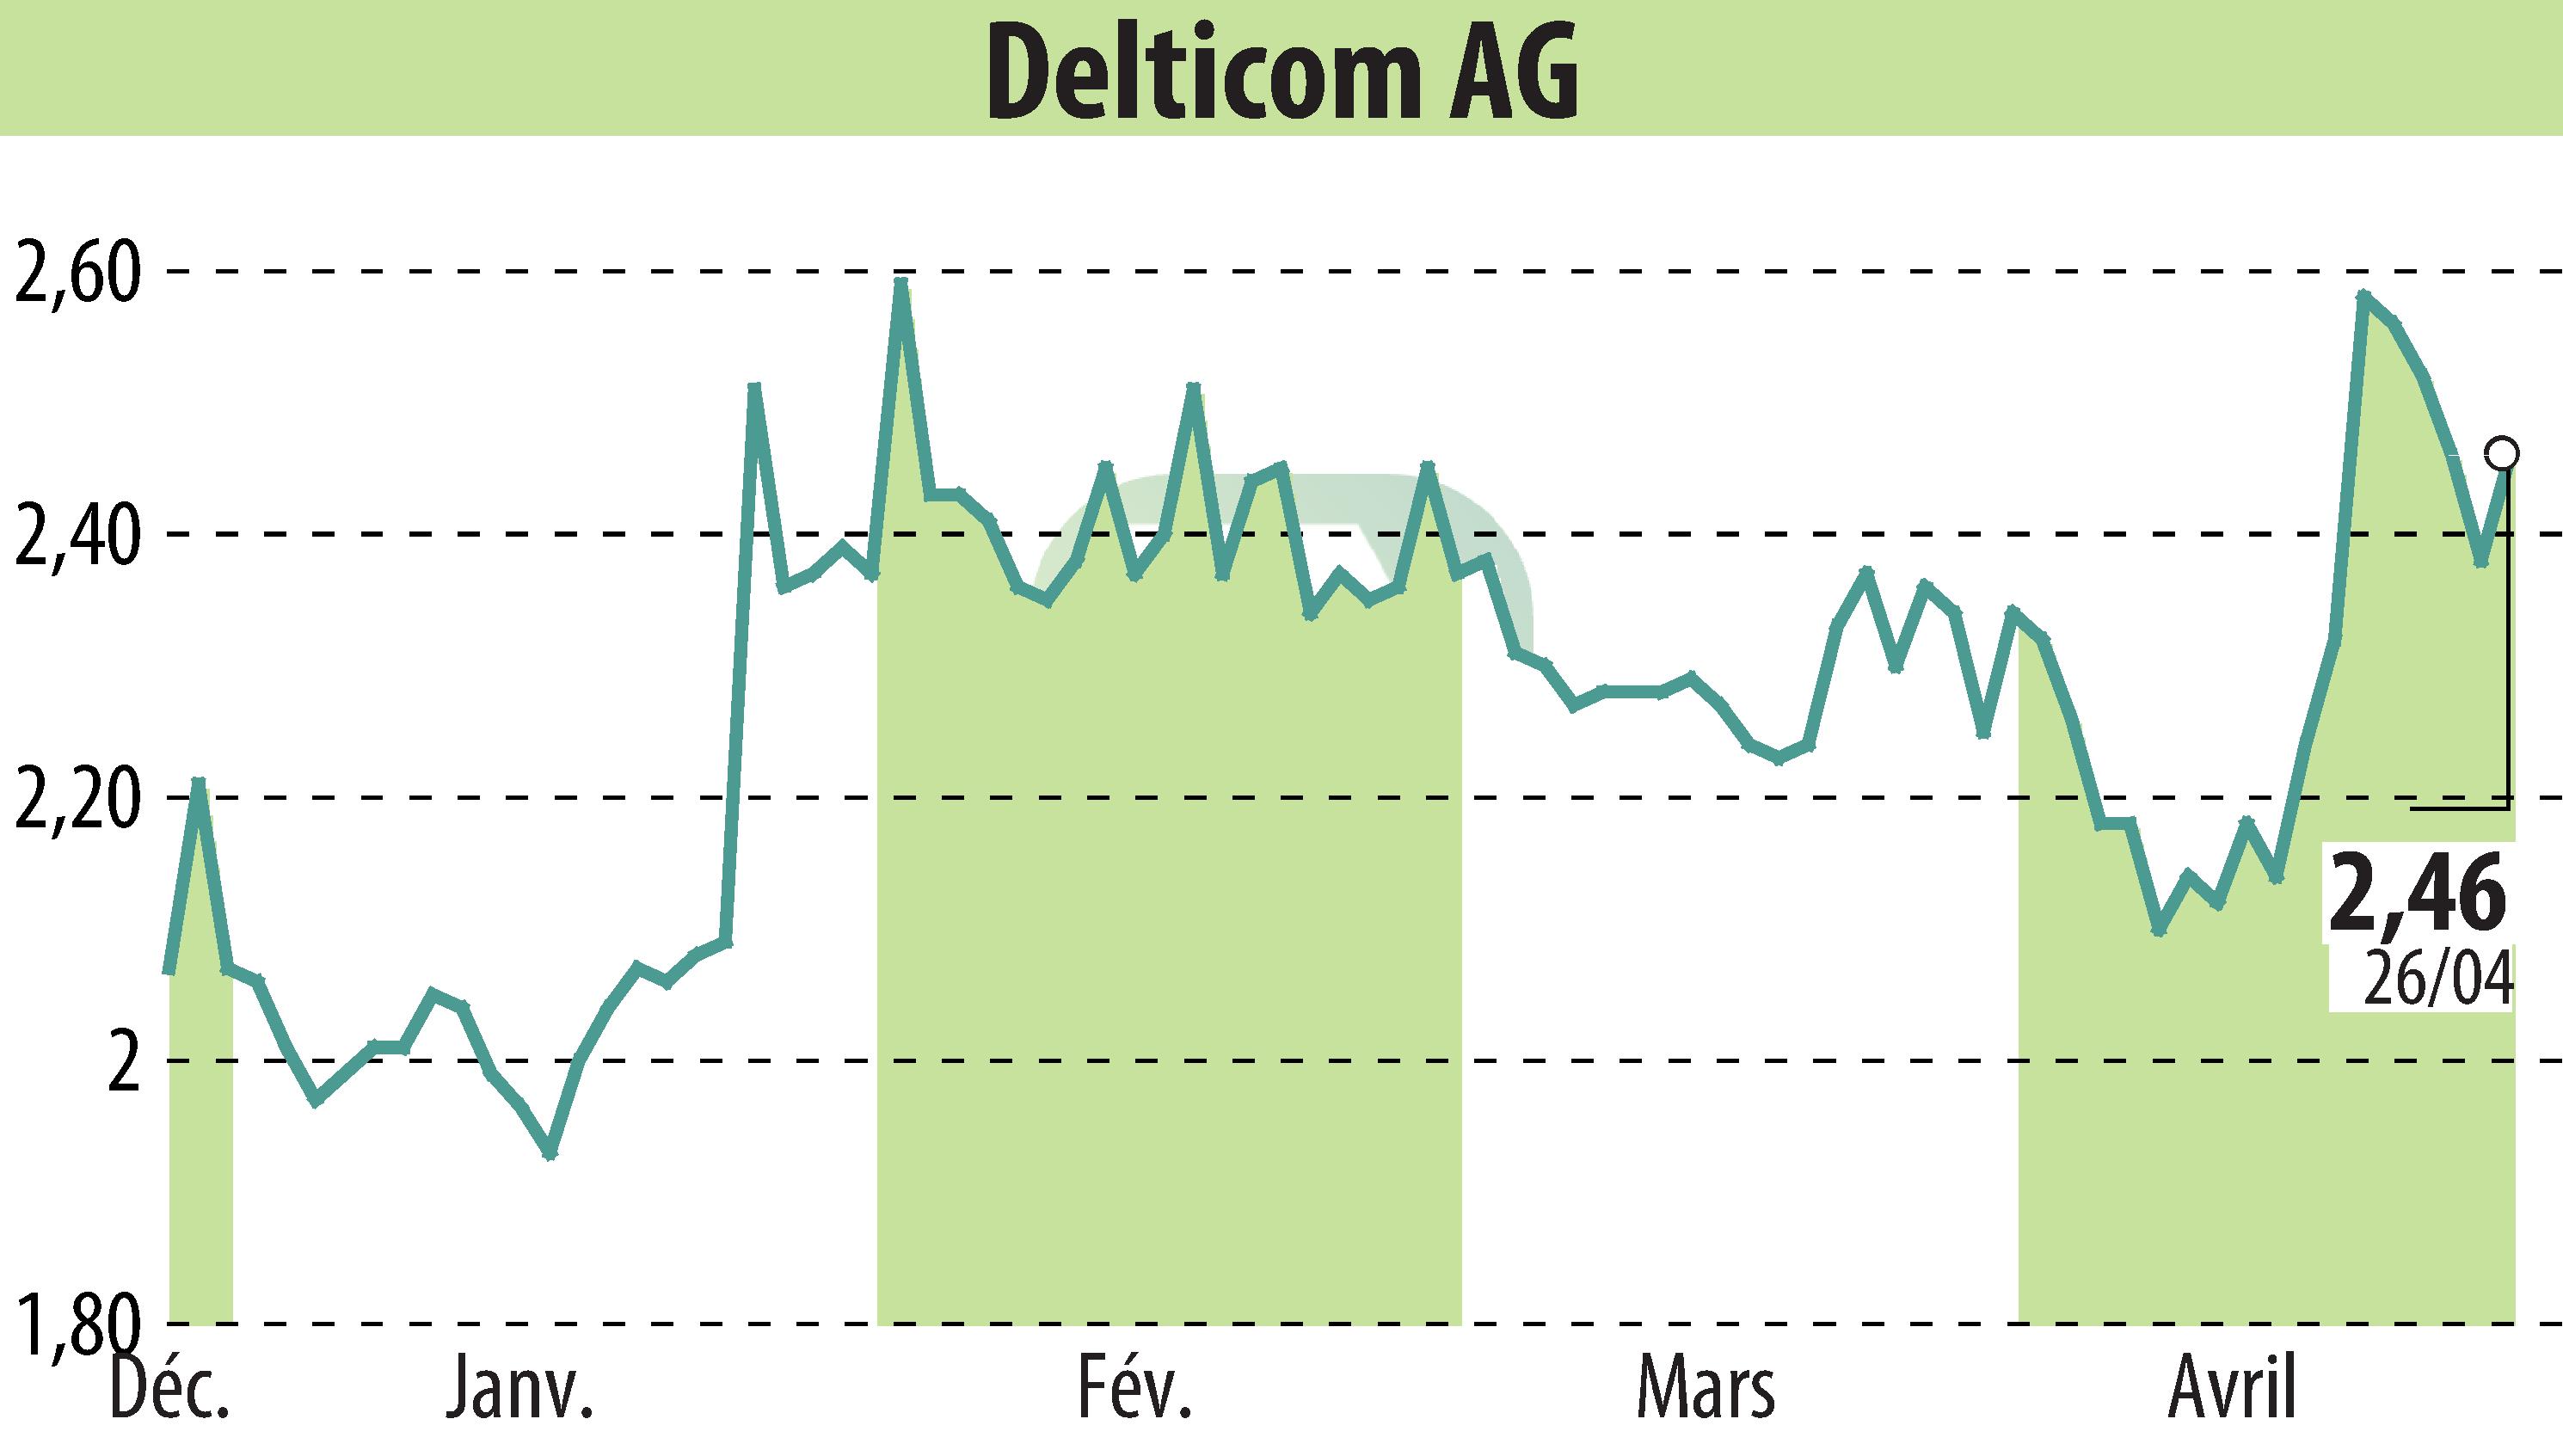 Stock price chart of Delticom AG (EBR:DEX) showing fluctuations.